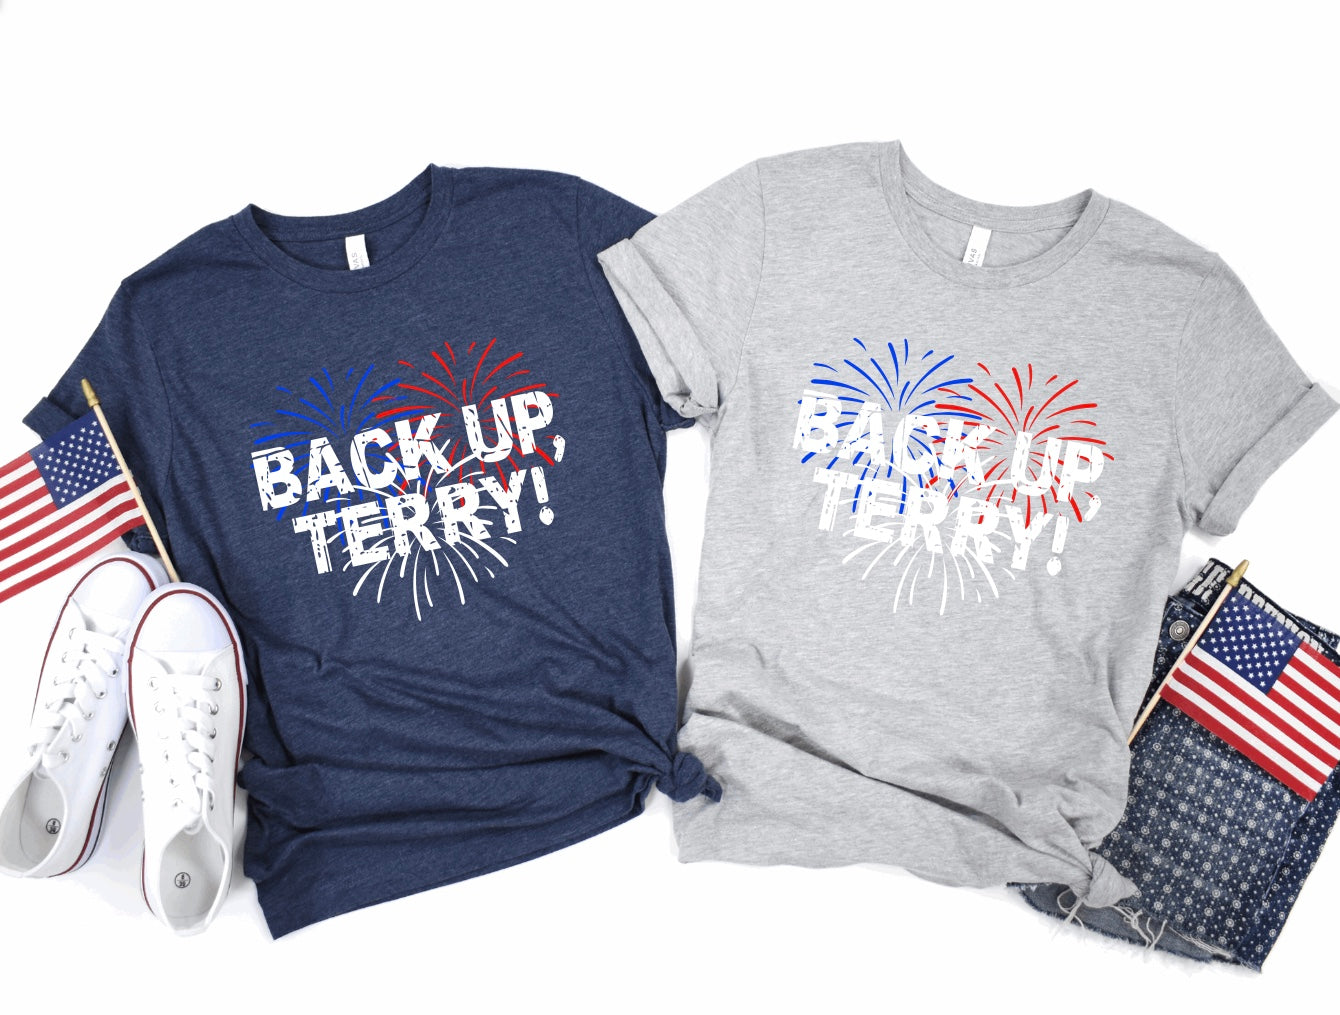 Back up Terry t-shirt 